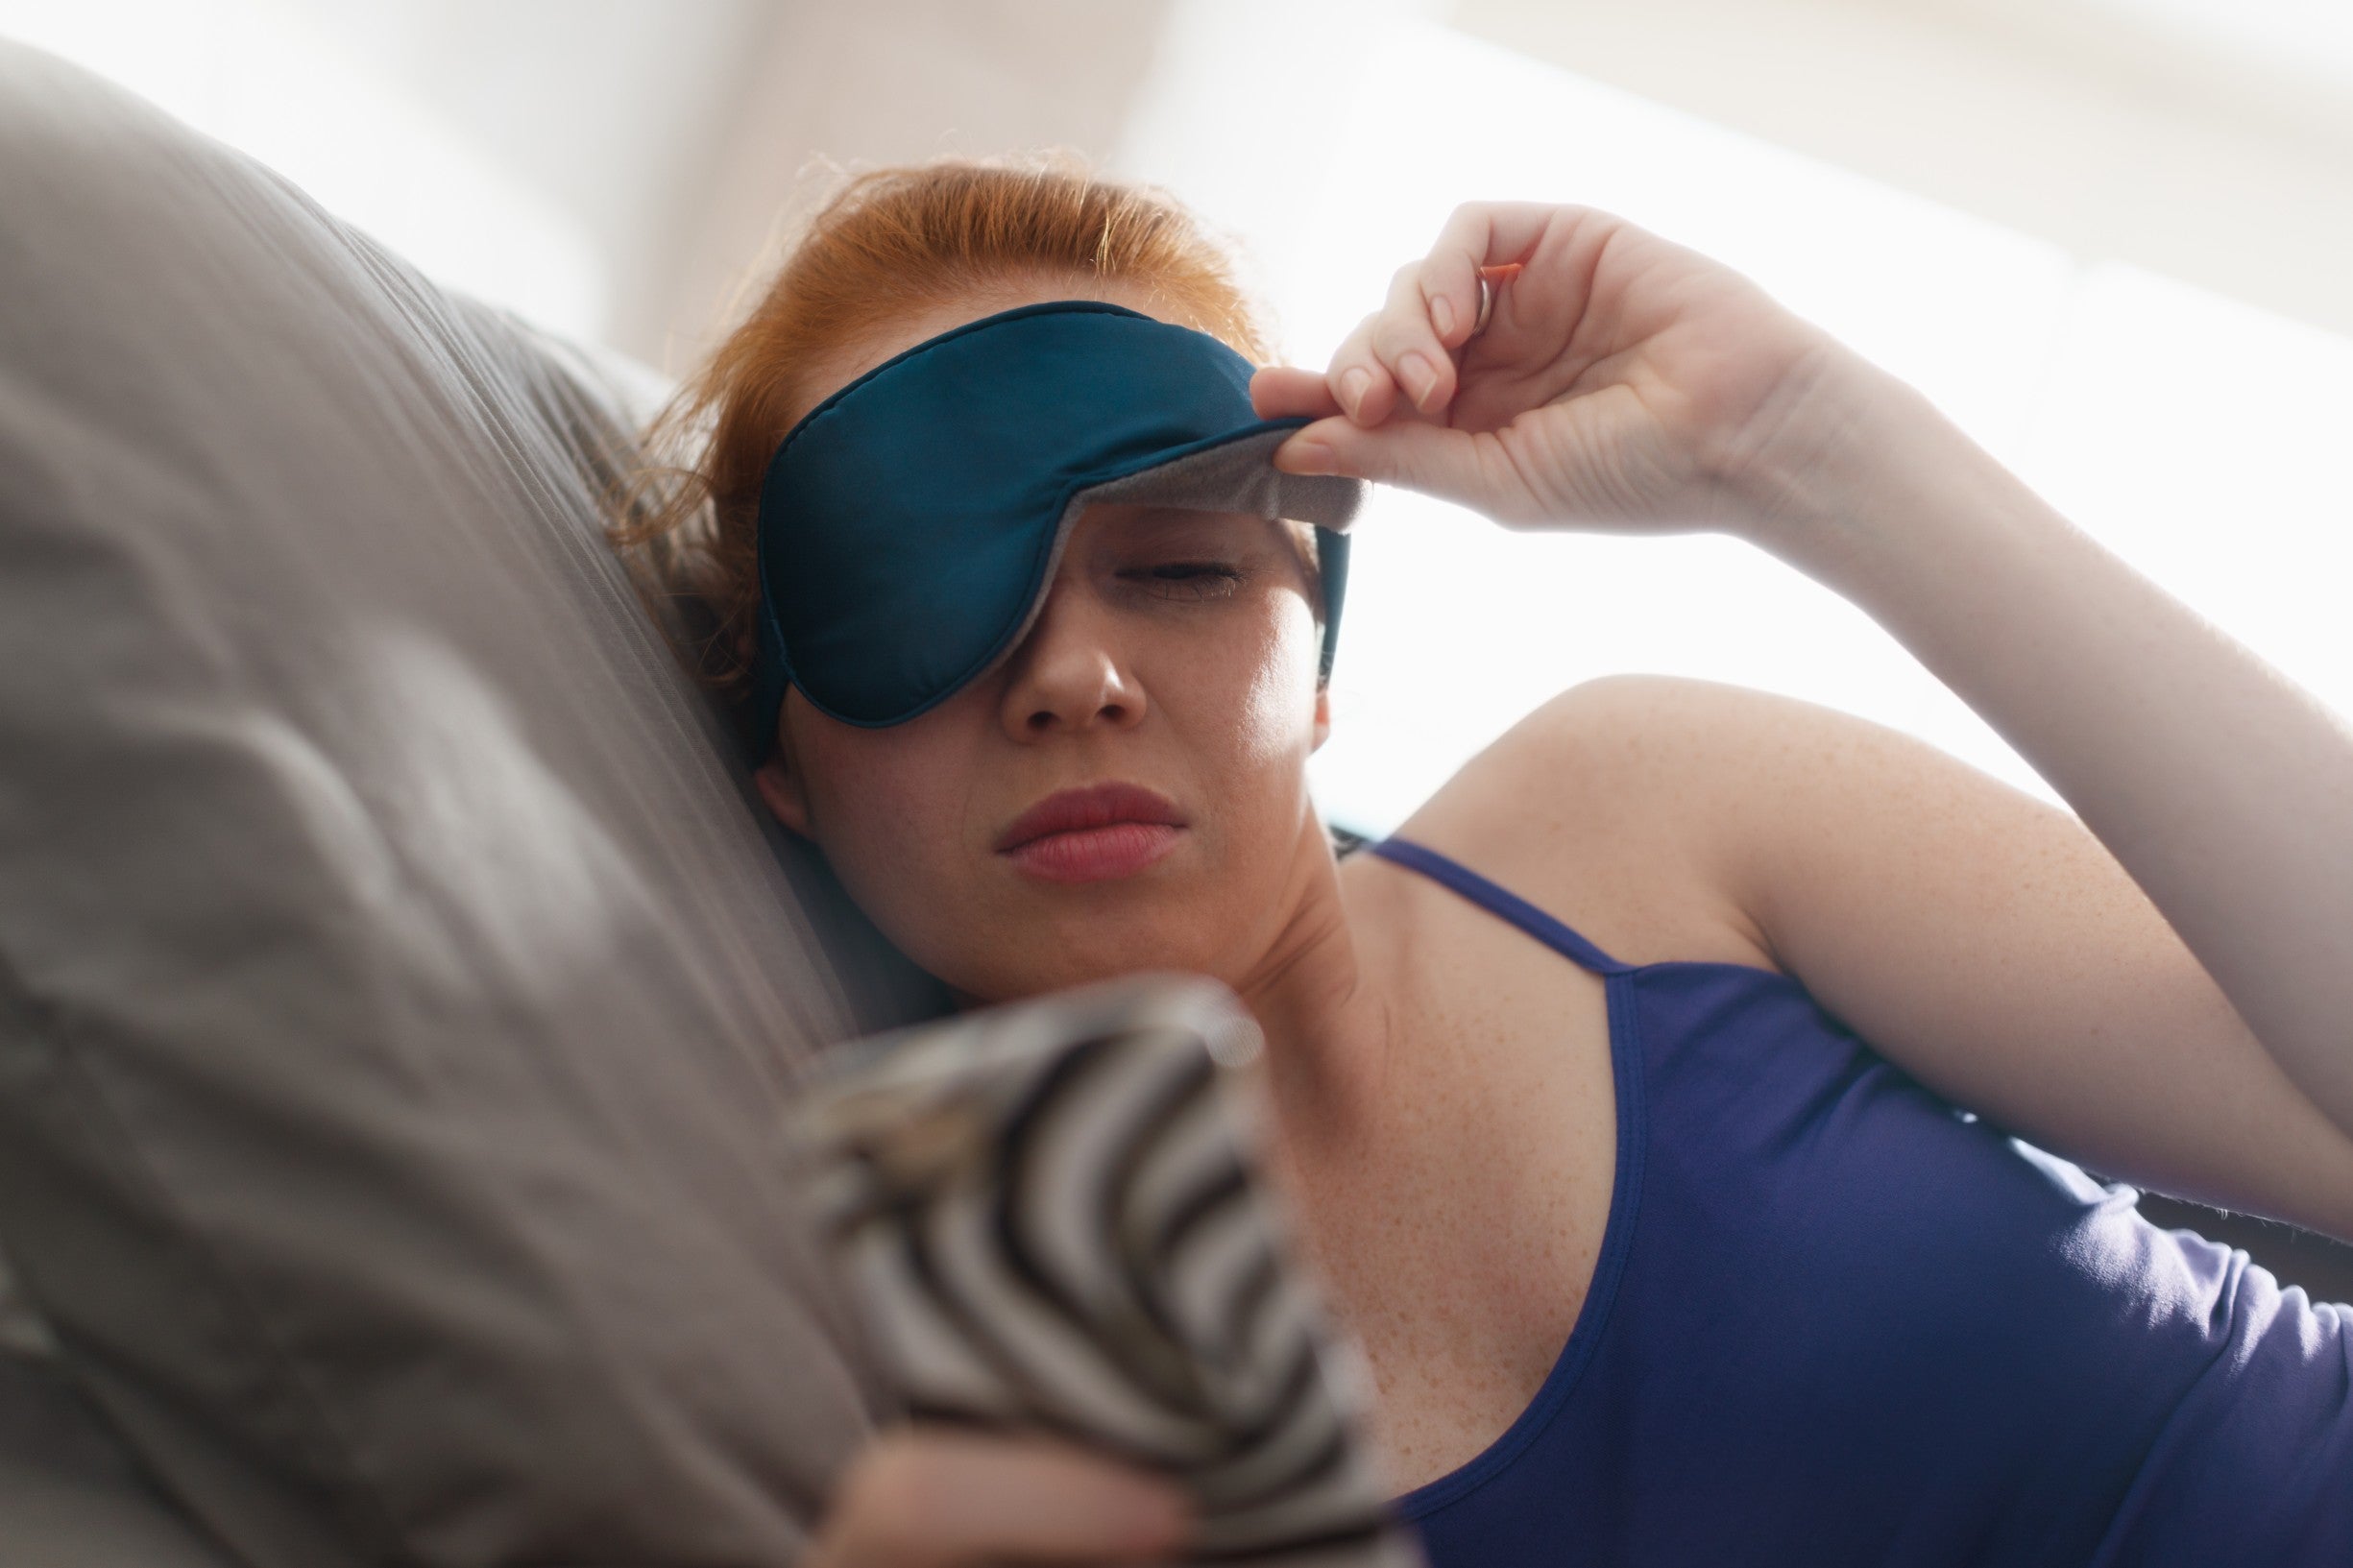 Young woman lifting her eye mask up to look at her phone